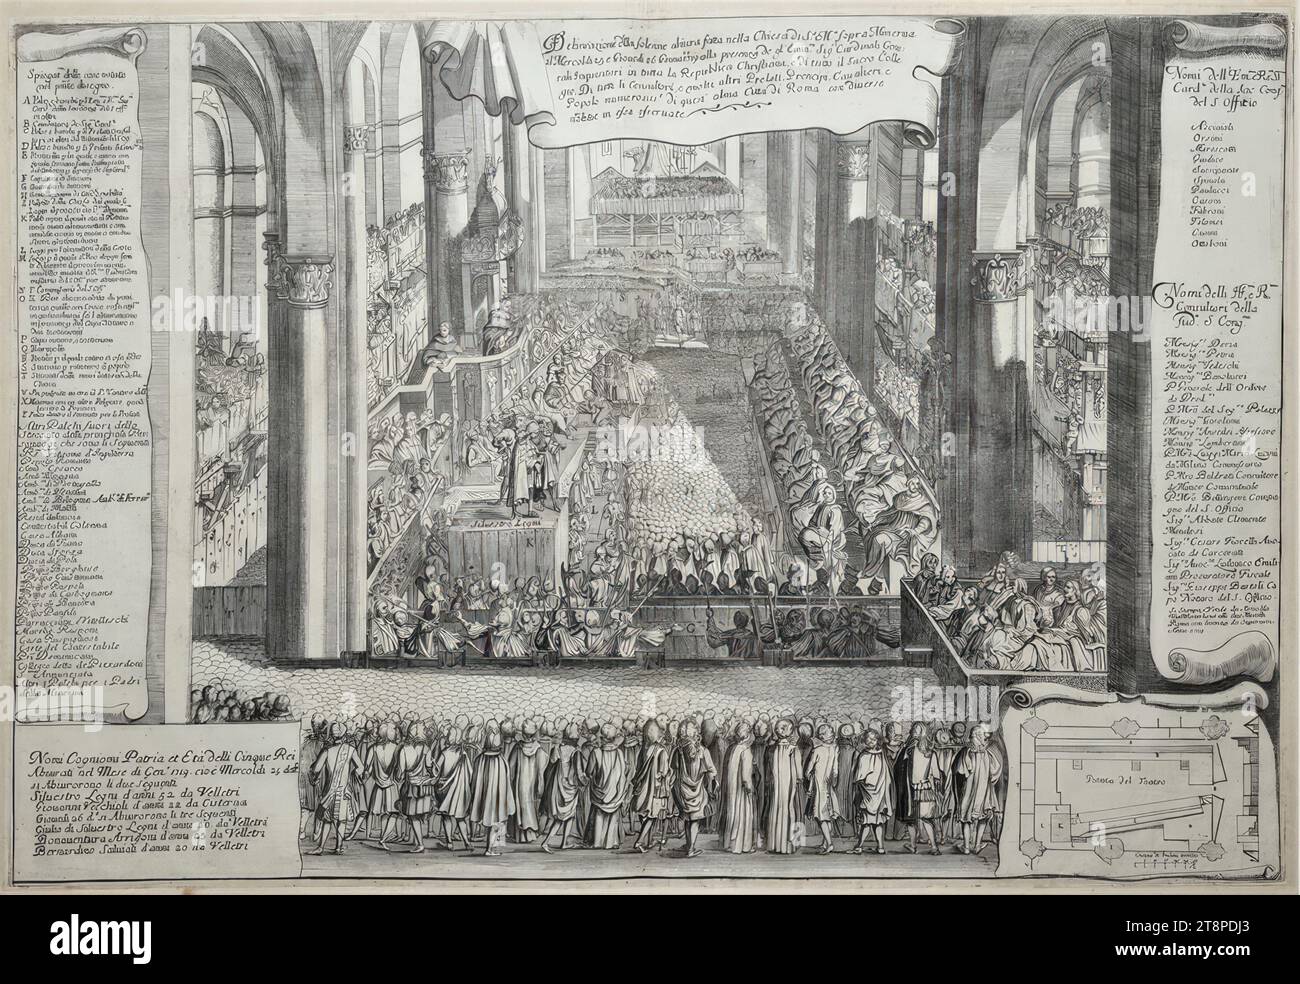 Solemn abjuration by Silvestro Legni and Giovanni Vecchioli before the General Inquisitor in the church of Santa Maria sopra Minerva in Rome on January 25, 1719, (1719), print, etching on paper, sheet: 40.9 × 59.8 cm Stock Photo